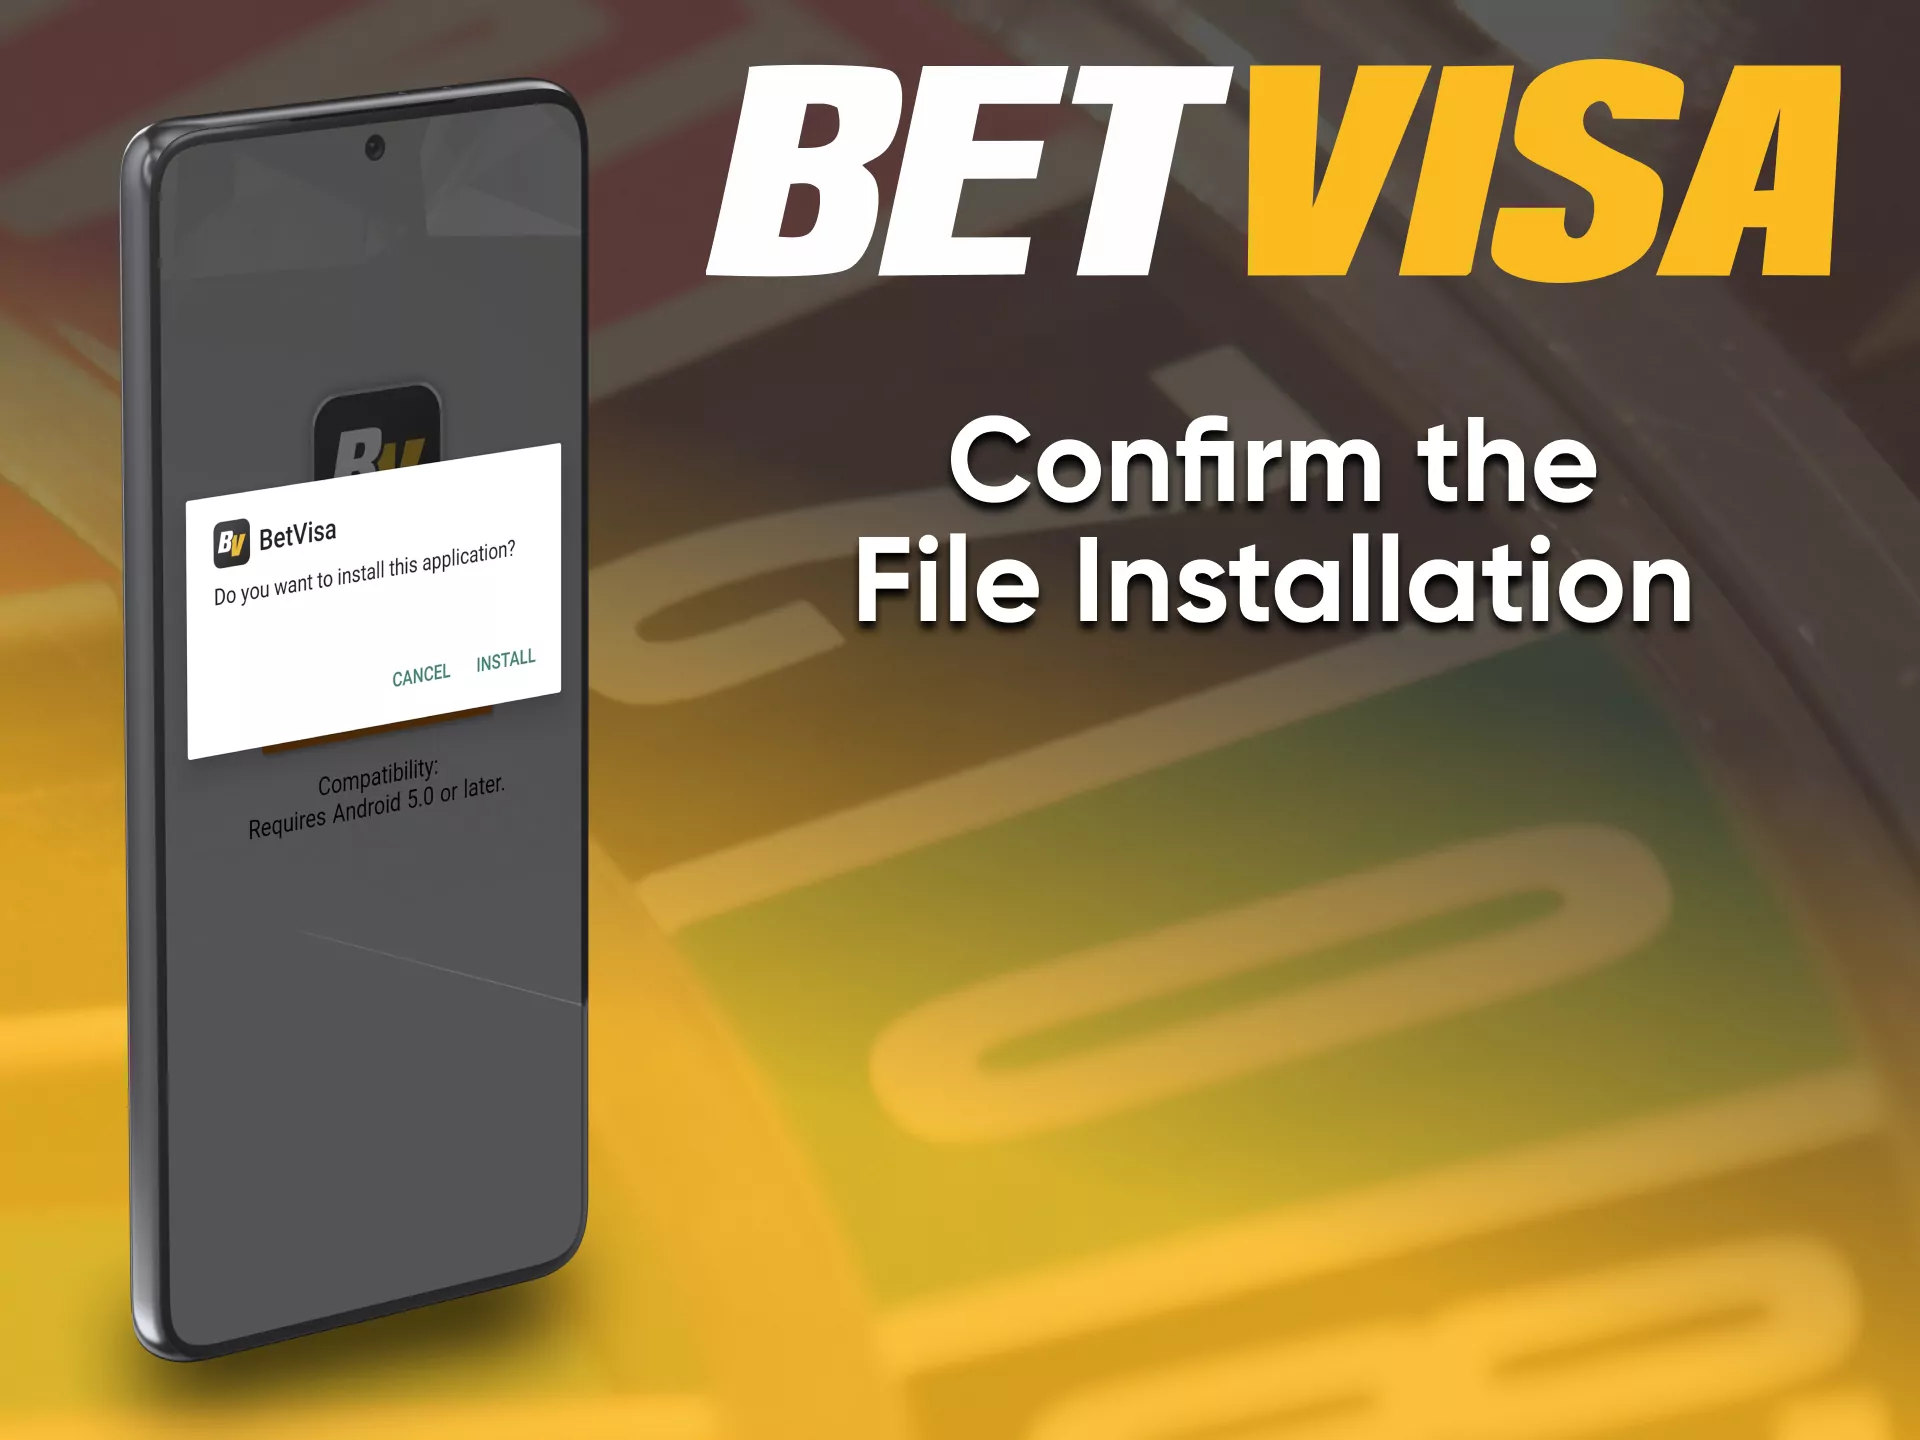 Complete the installation and launch the application from BetVisa.